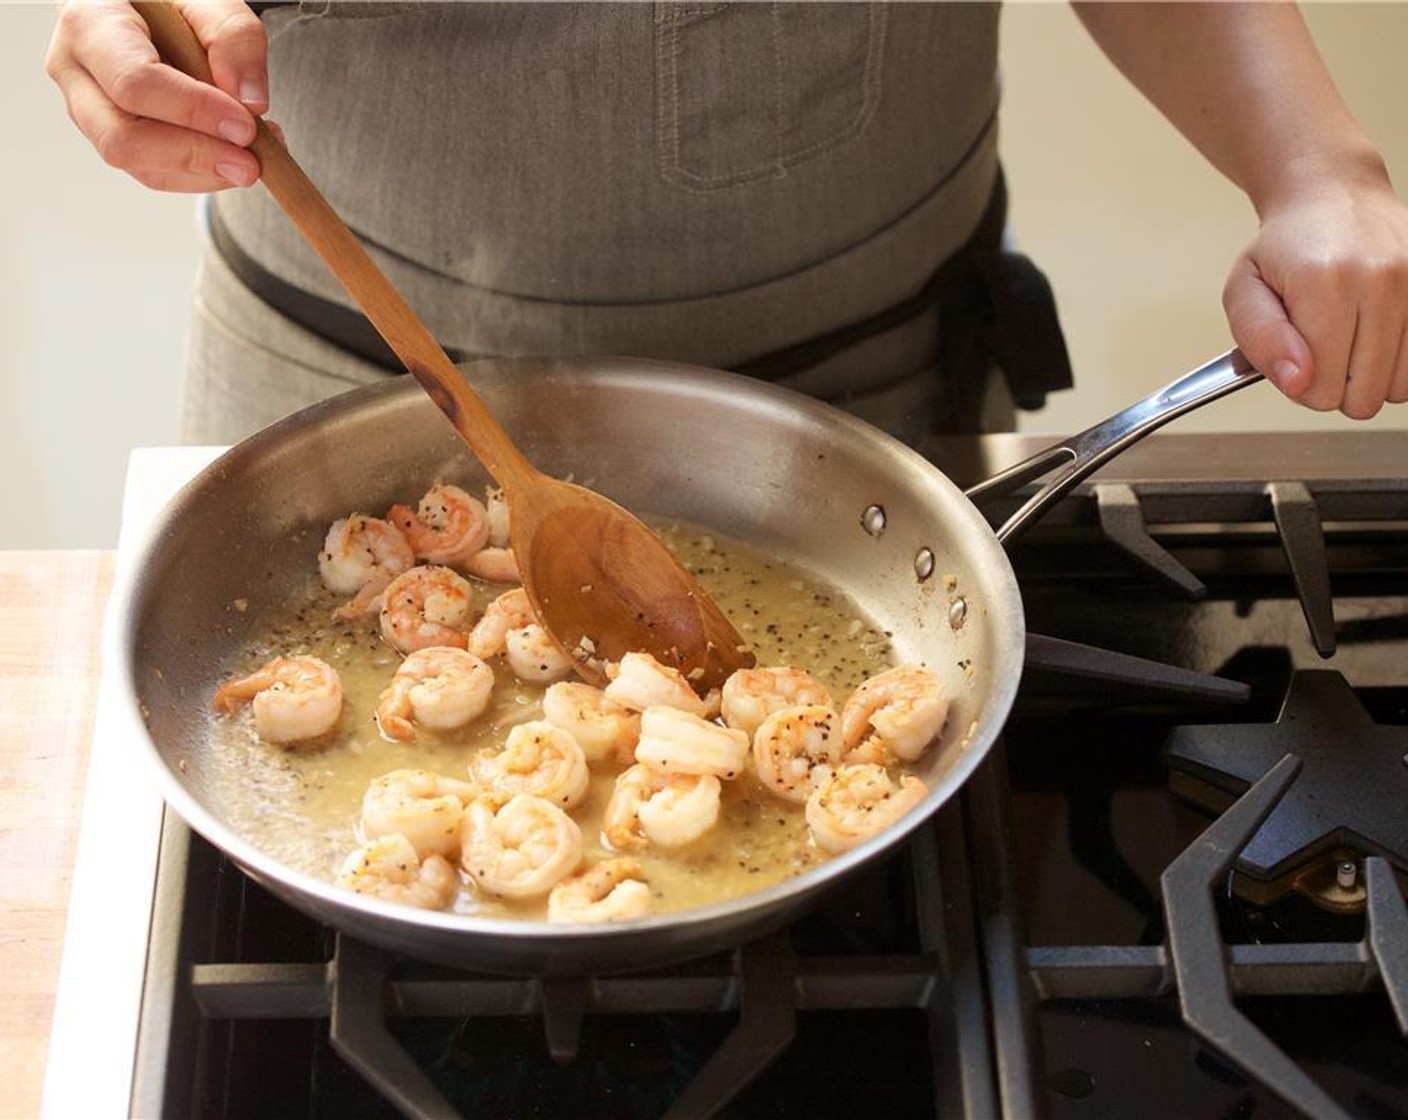 step 5 In a large saute pan over medium high heat, add Canola Oil (1 Tbsp). When the oil is hot, add the garlic and ginger and cook for one minute, stirring occasionally to release some of the flavors. Be careful not to burn!